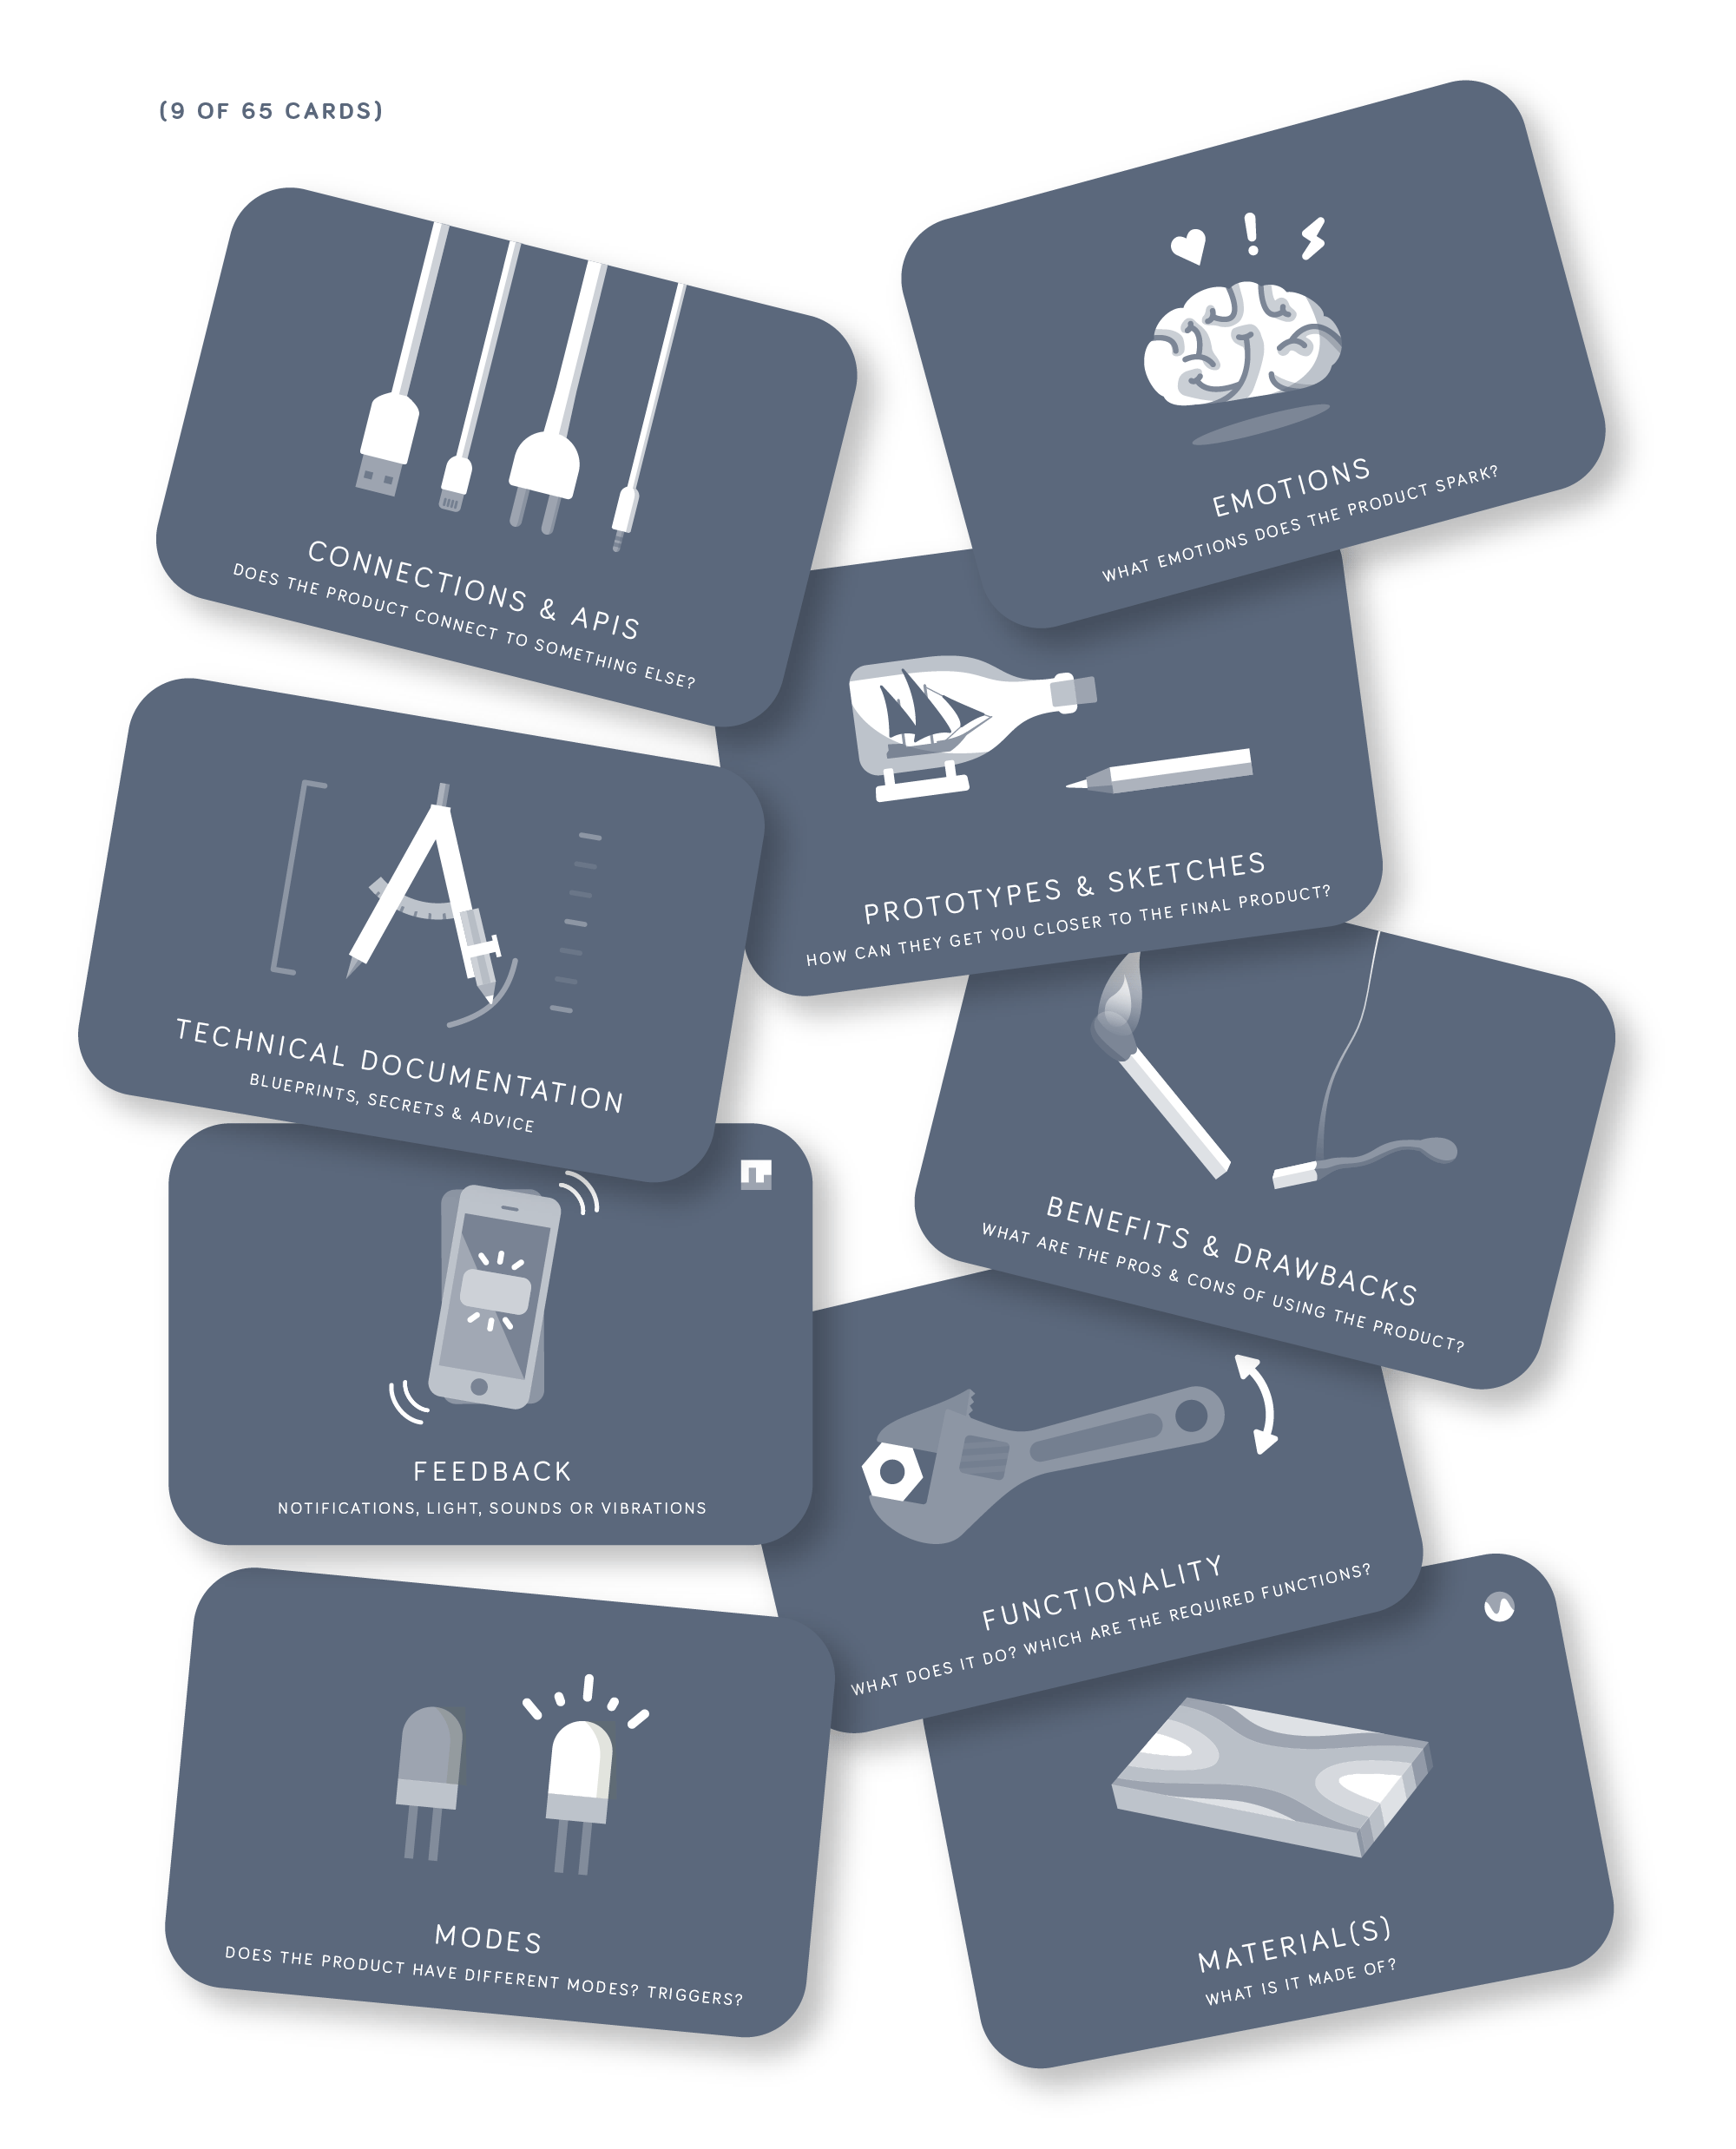 Product Development cards